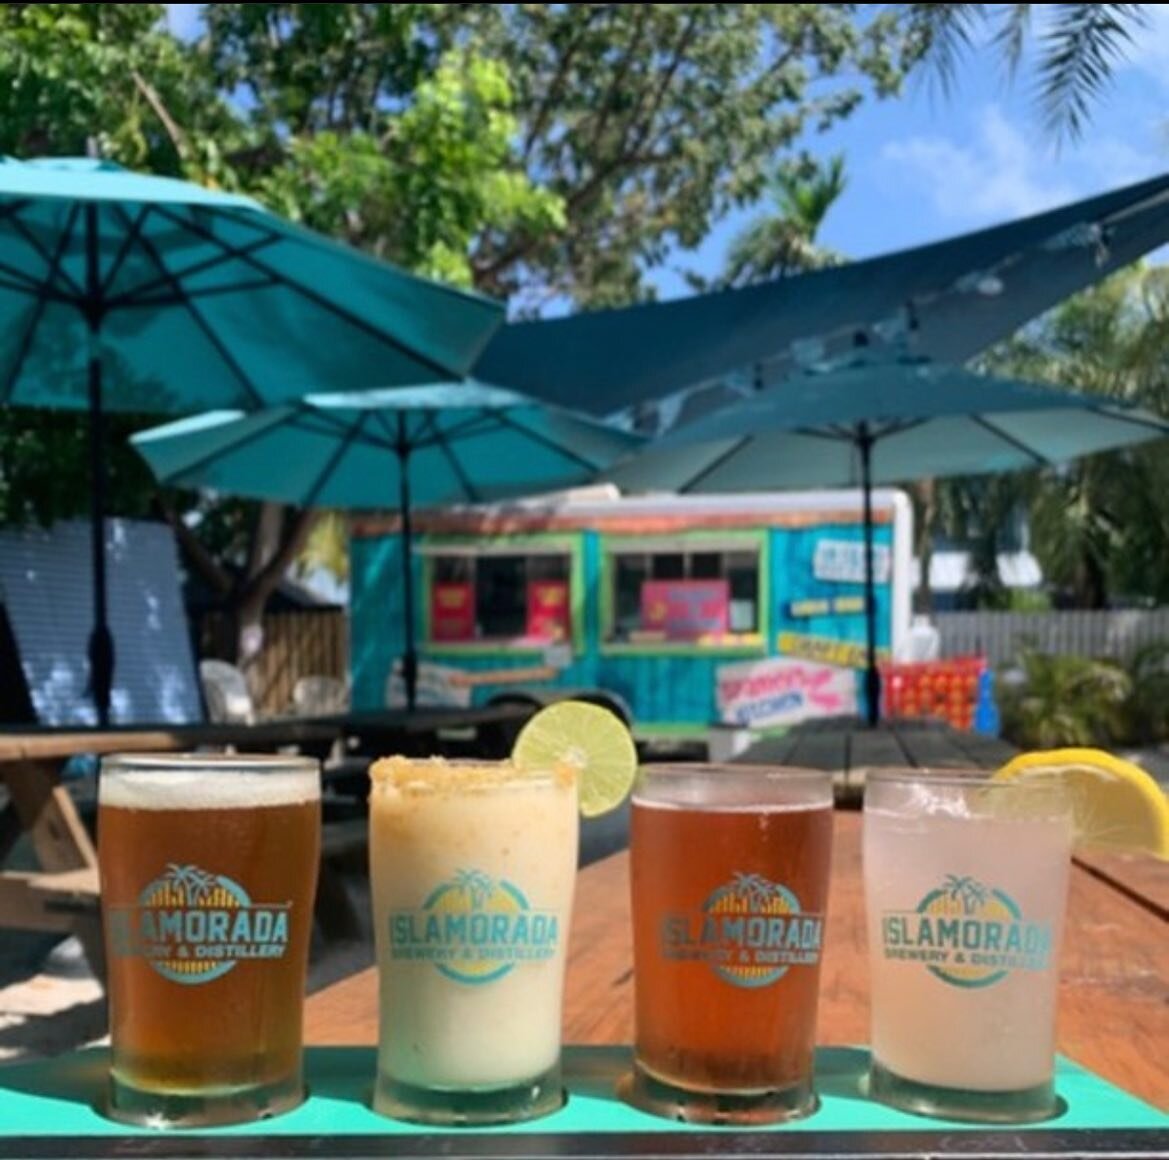 Is it the weekend yet? Beer &amp; Cocktail flight from @islamoradabeverages 🍹Great pic from @tmgroupproductions  #islamorada #floridakeys #islamoradabeercompany #beerflight #cocktailflight #beergarden #scoopguideislamorada